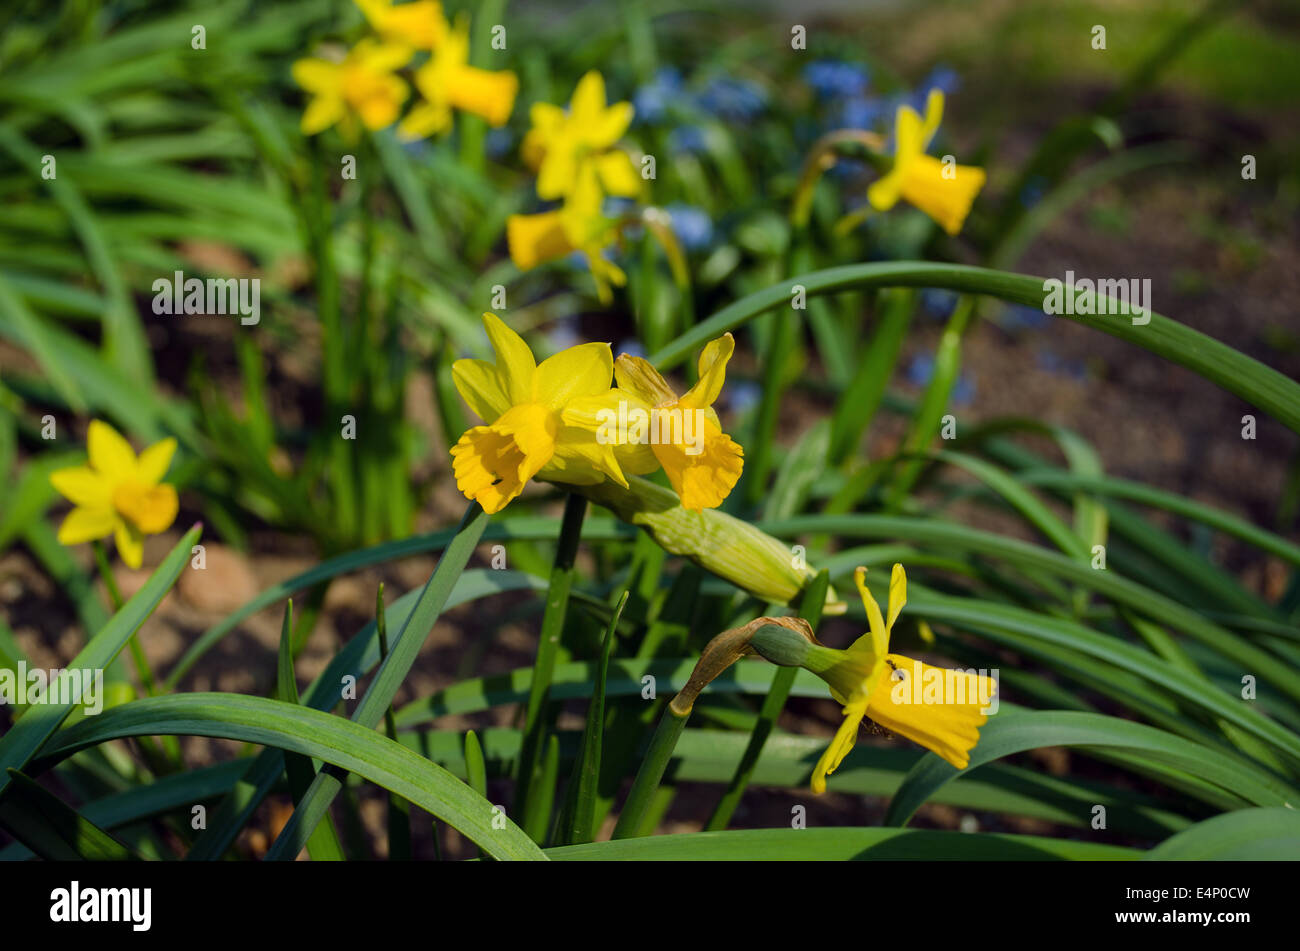 spring small yellow as the sun narcissus with green leaves Stock Photo